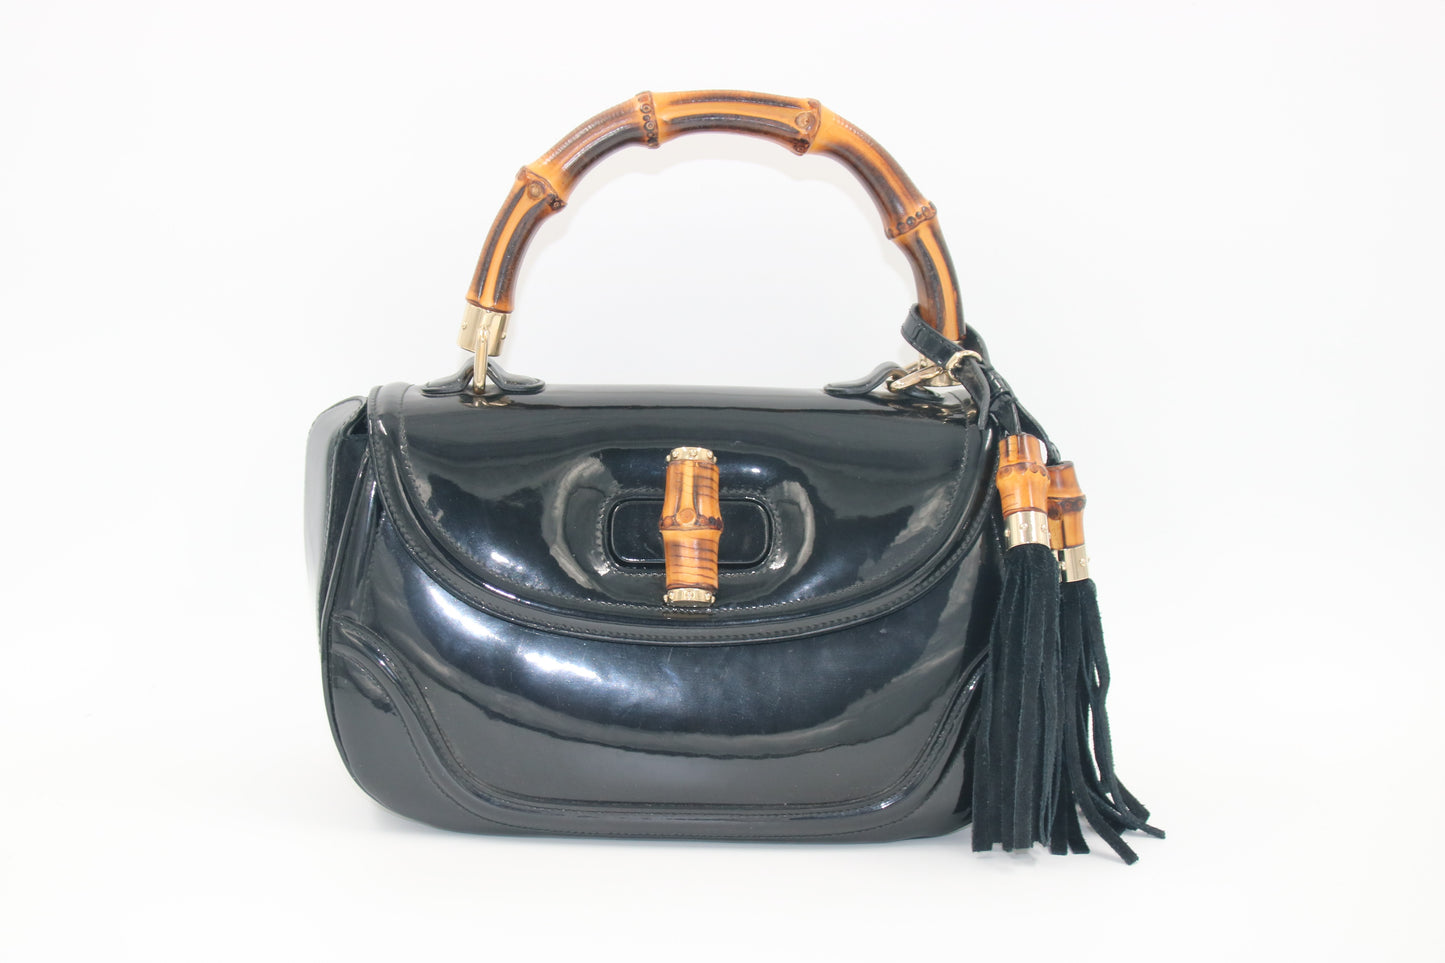 GUCCI Black Patent Leather New Bamboo Top Handle Bag